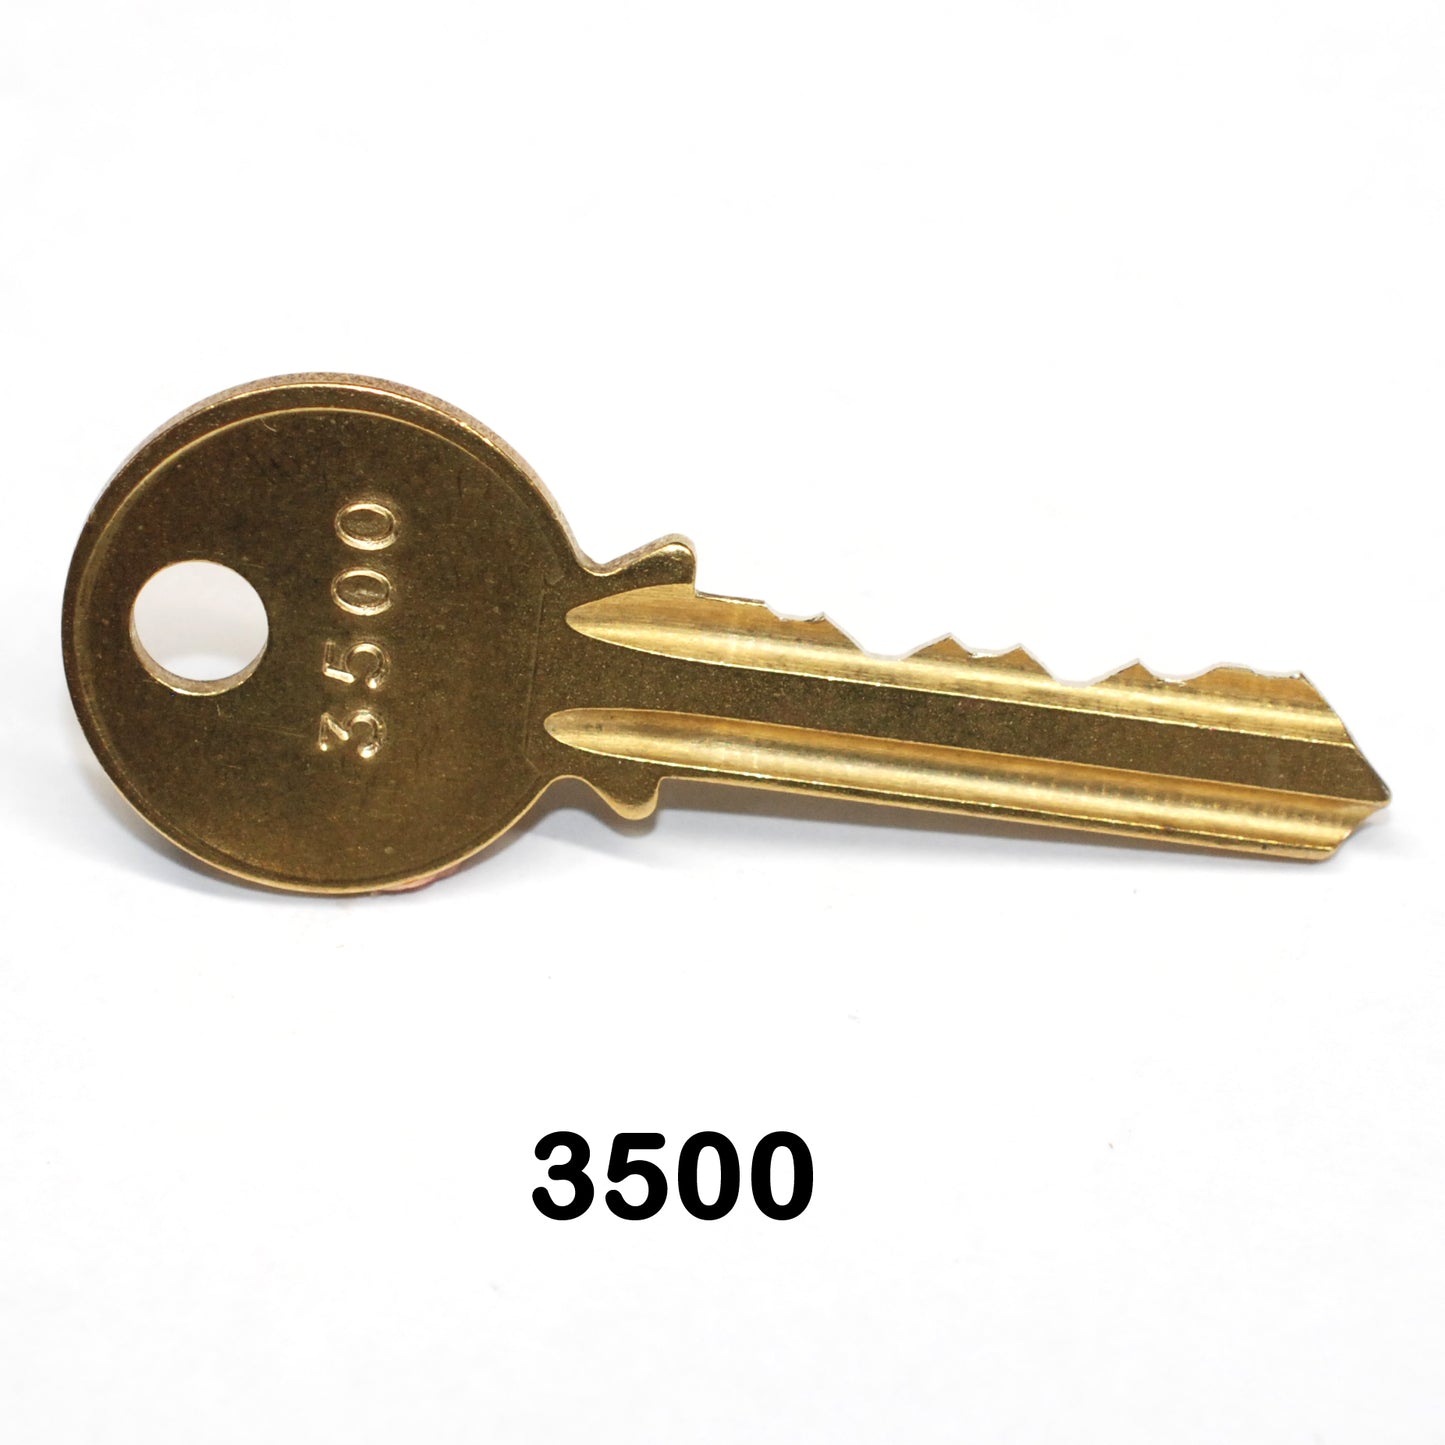 3500 Yale Elevator Key for Armor Fixtures